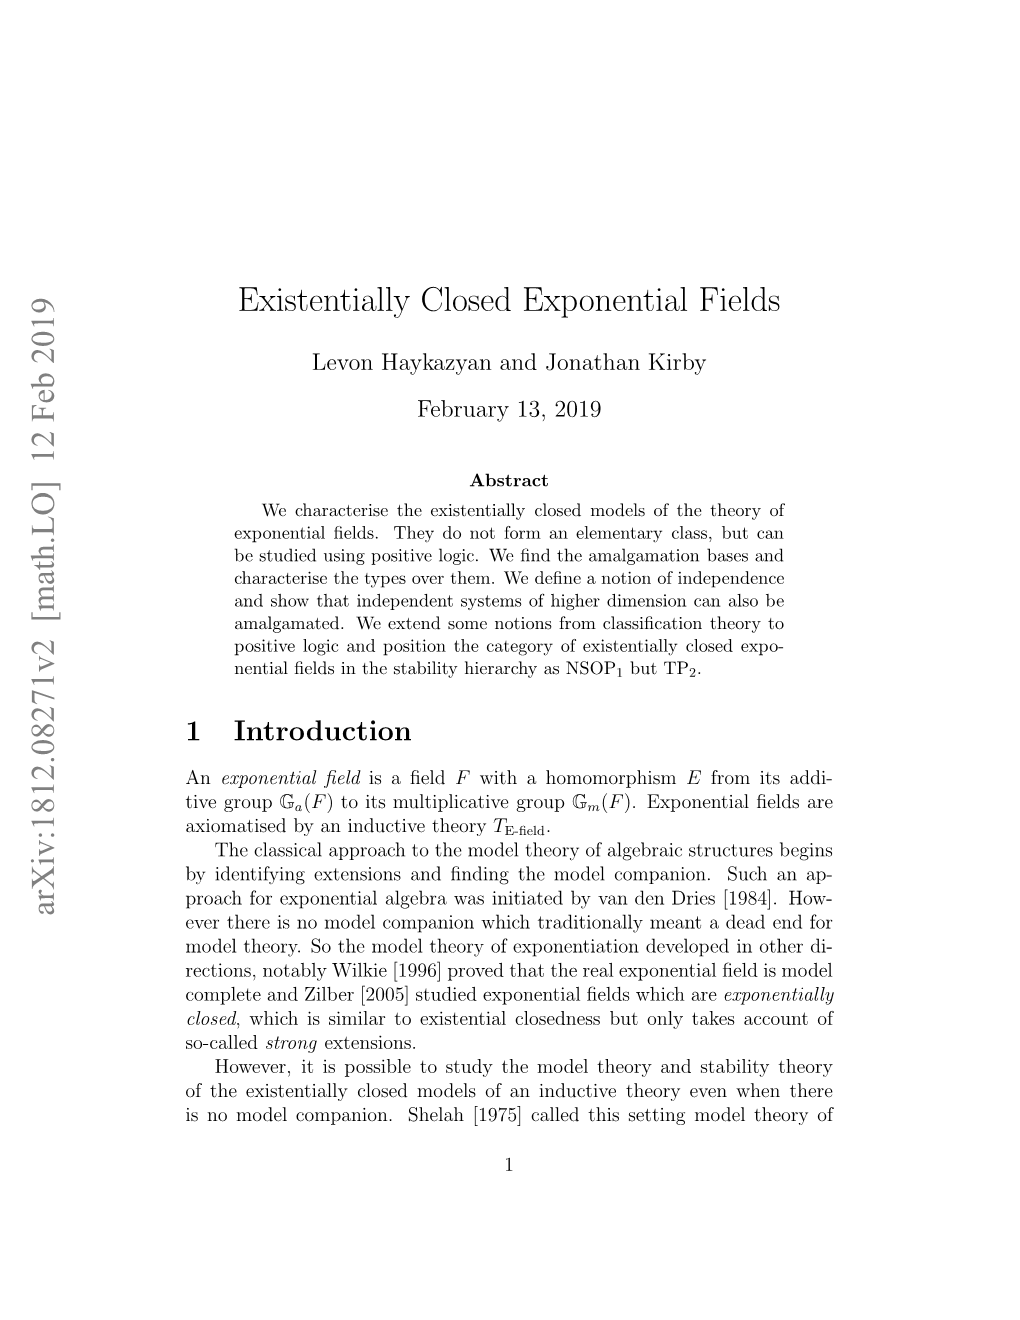 Existentially Closed Exponential Fields